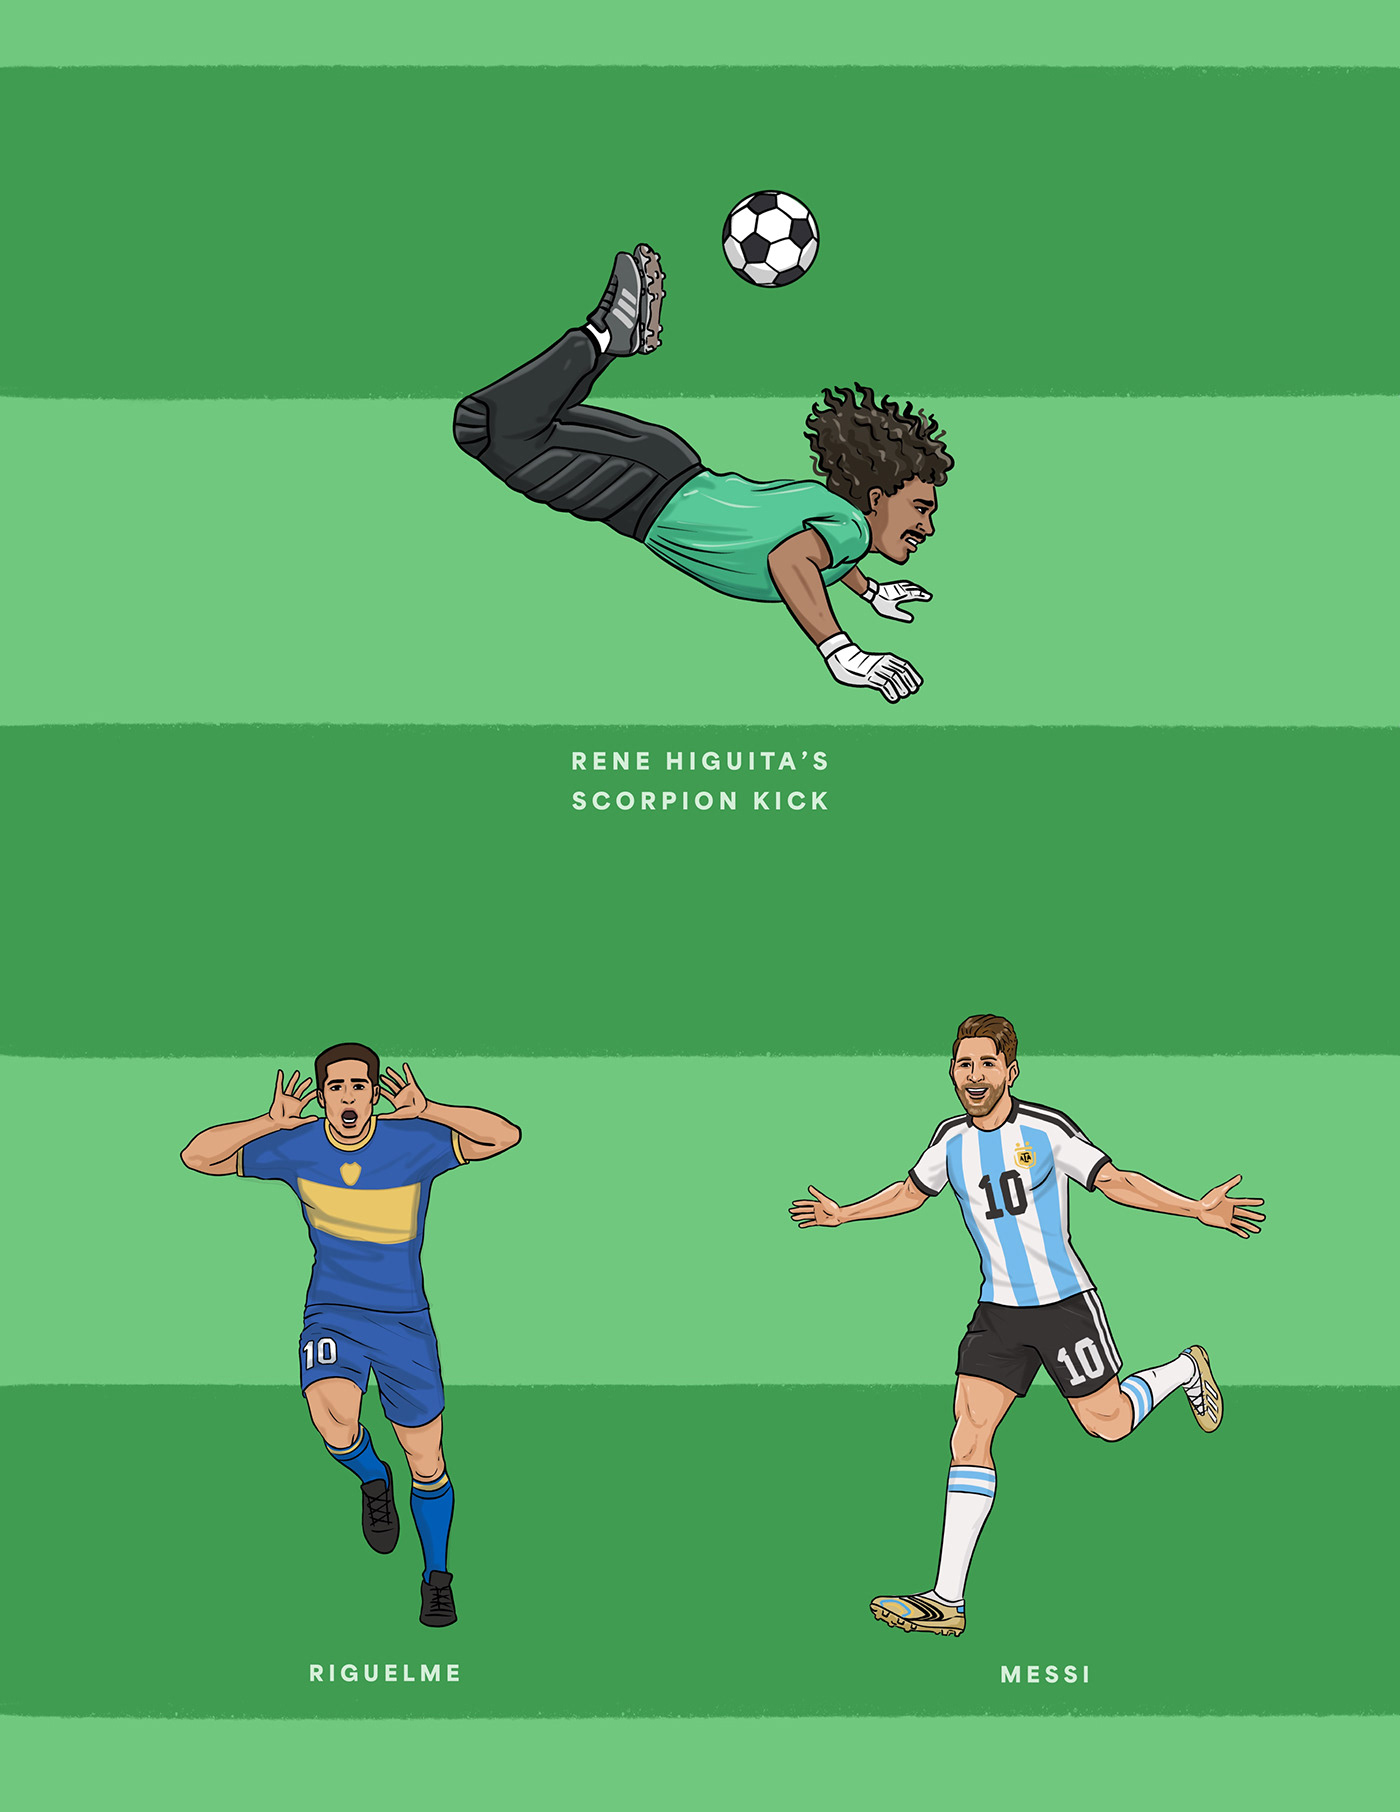 Cartoon portrait of Messi, Riguelme and Higuita - famous football players of South America